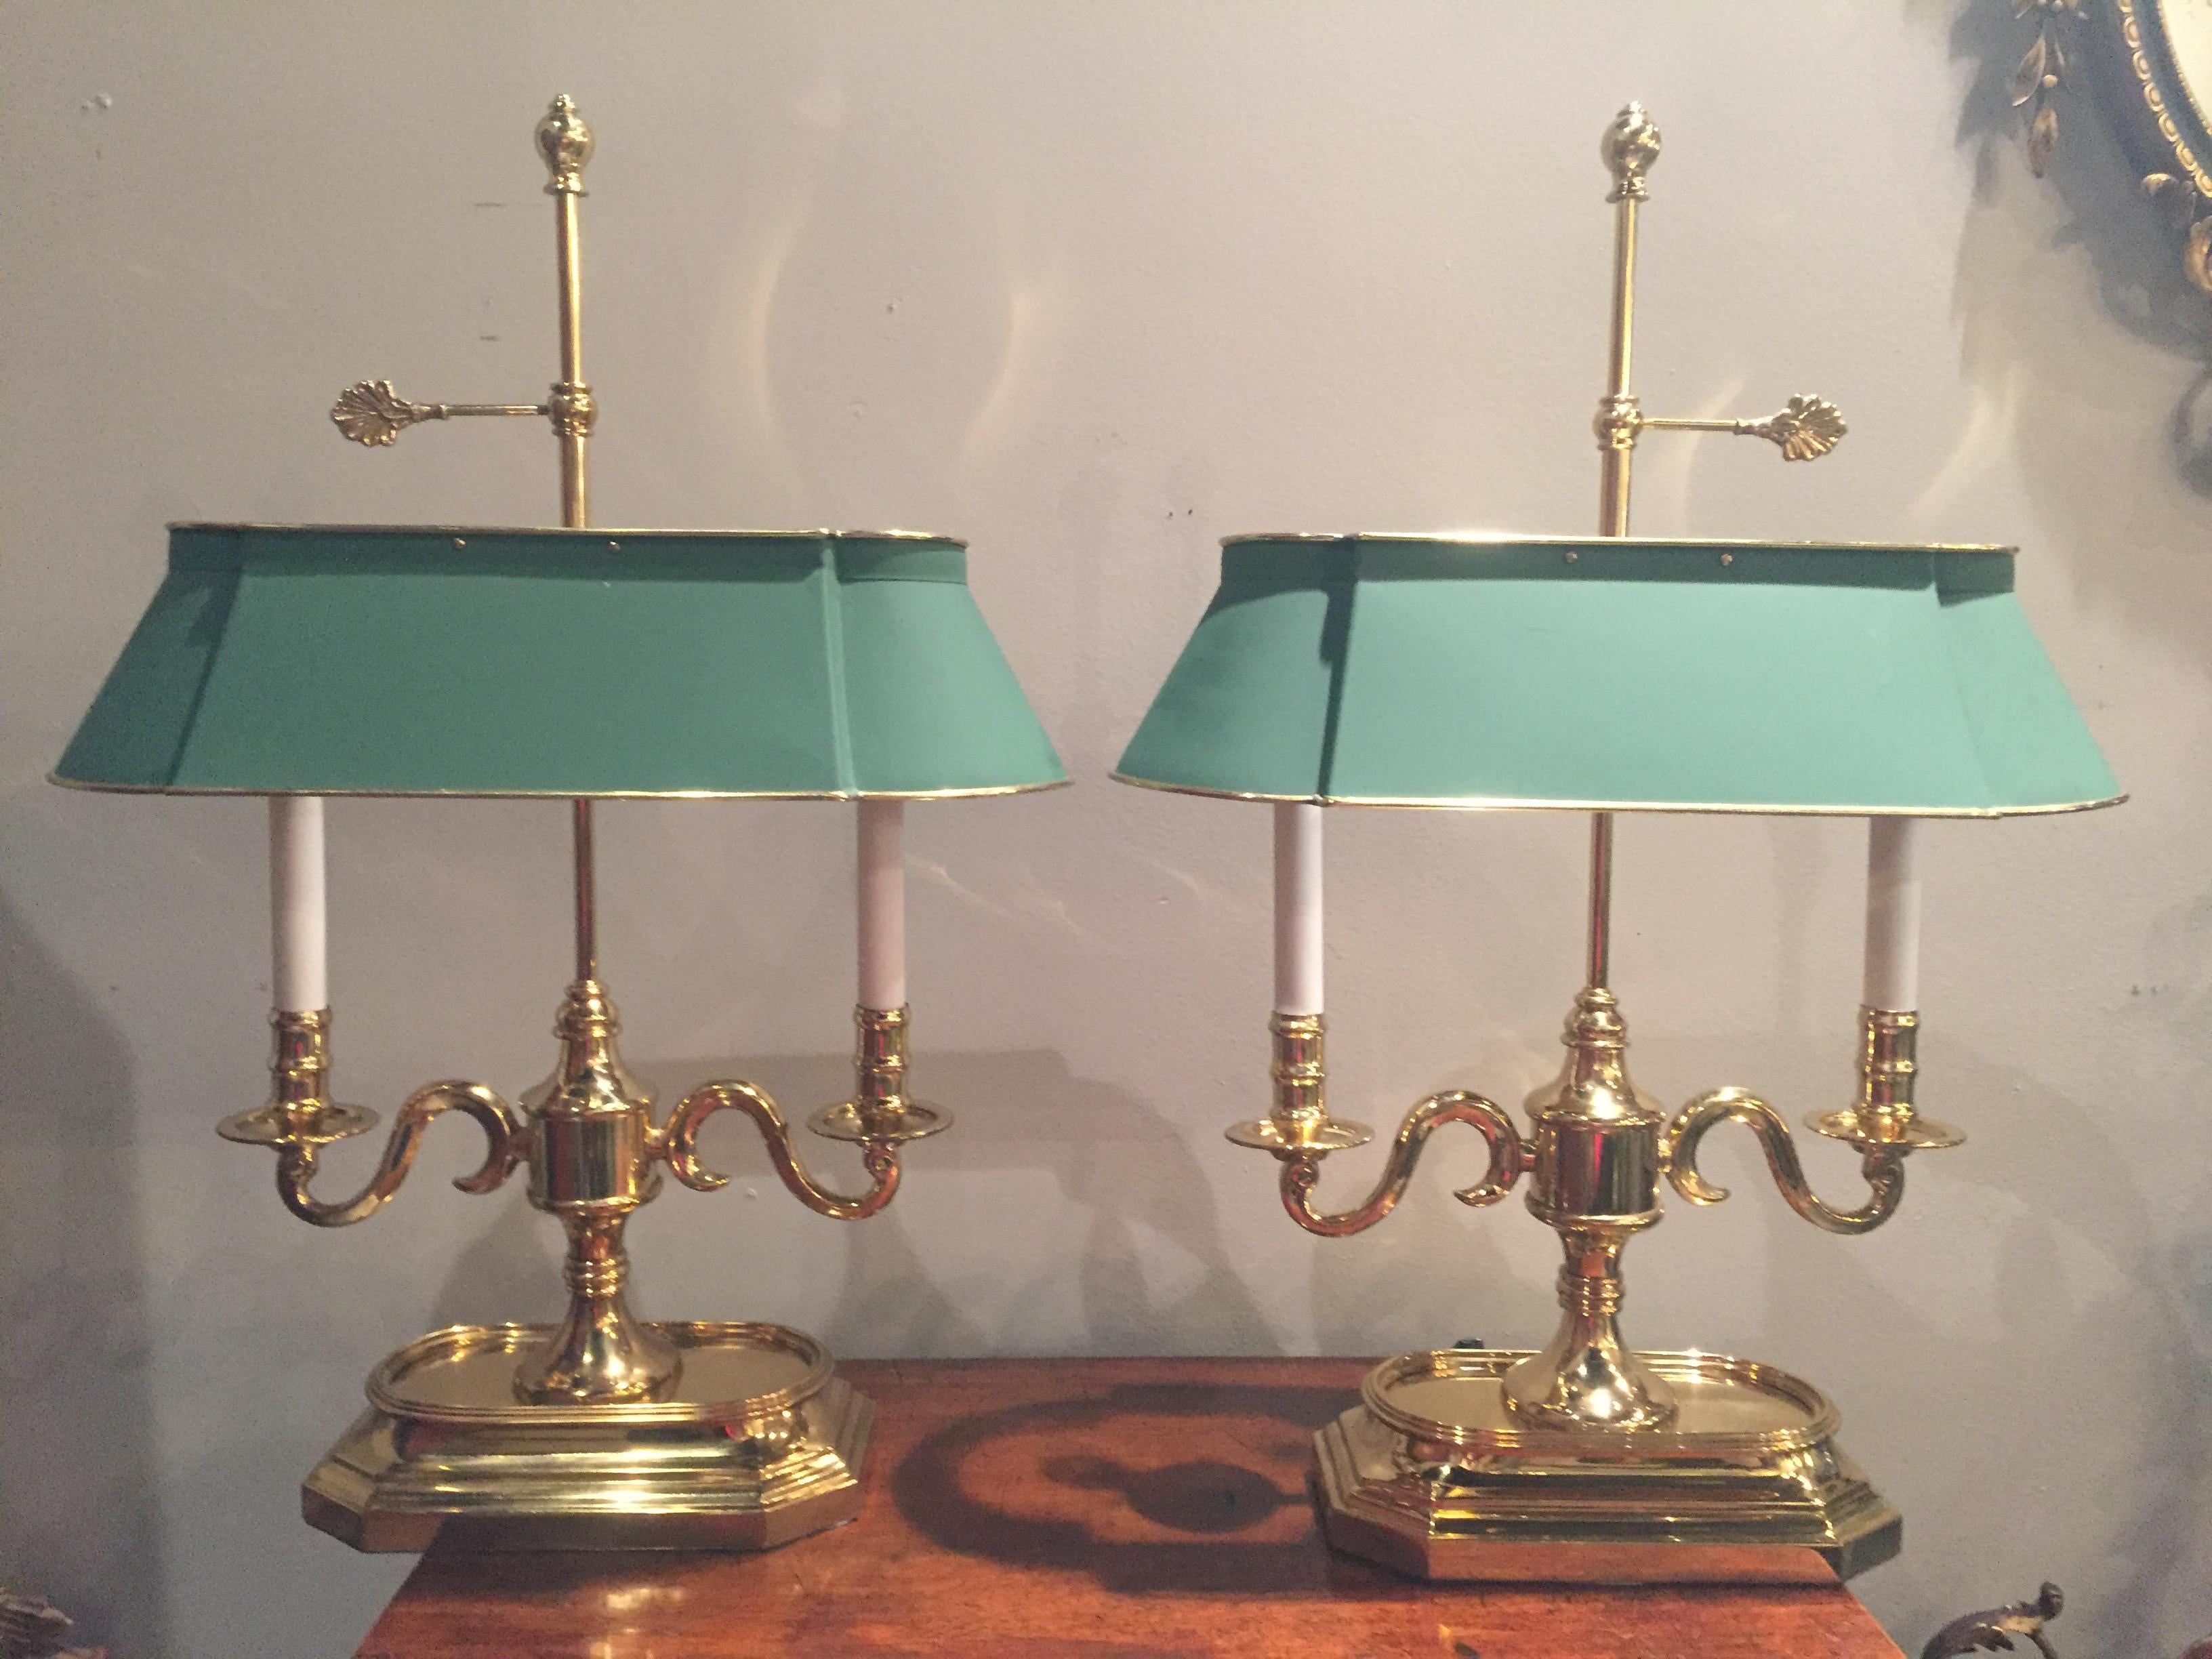 A quality pair of brass two-arm candlestick table lamps with handsome green painted brass lamp shades, decorative finials and screw key to adjust shade height. B0ase is 10 x 6.
  